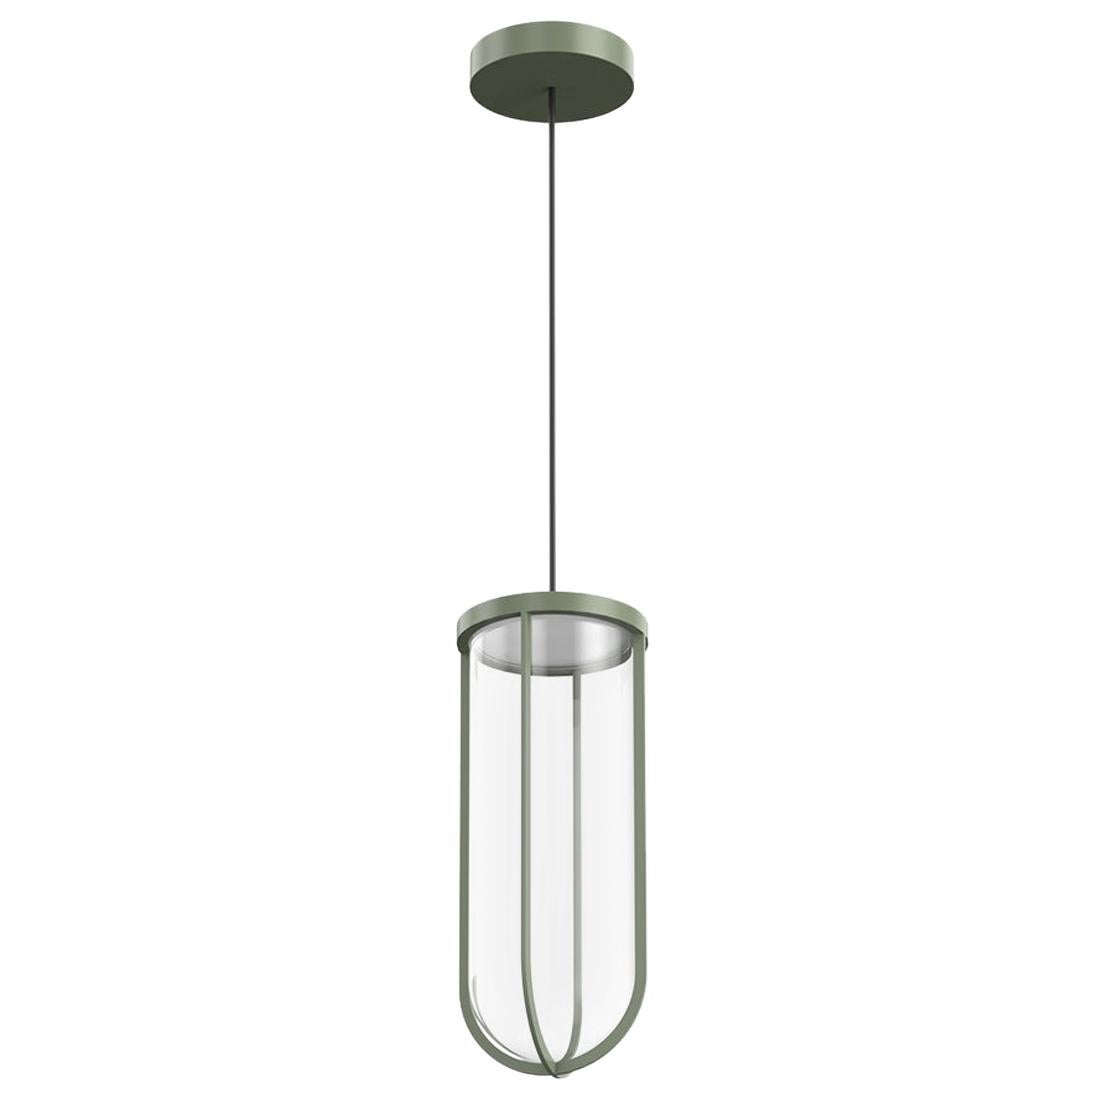 Flos In Vitro 3000K LED Suspension Lamp in Pale Green by Philippe Starck For Sale